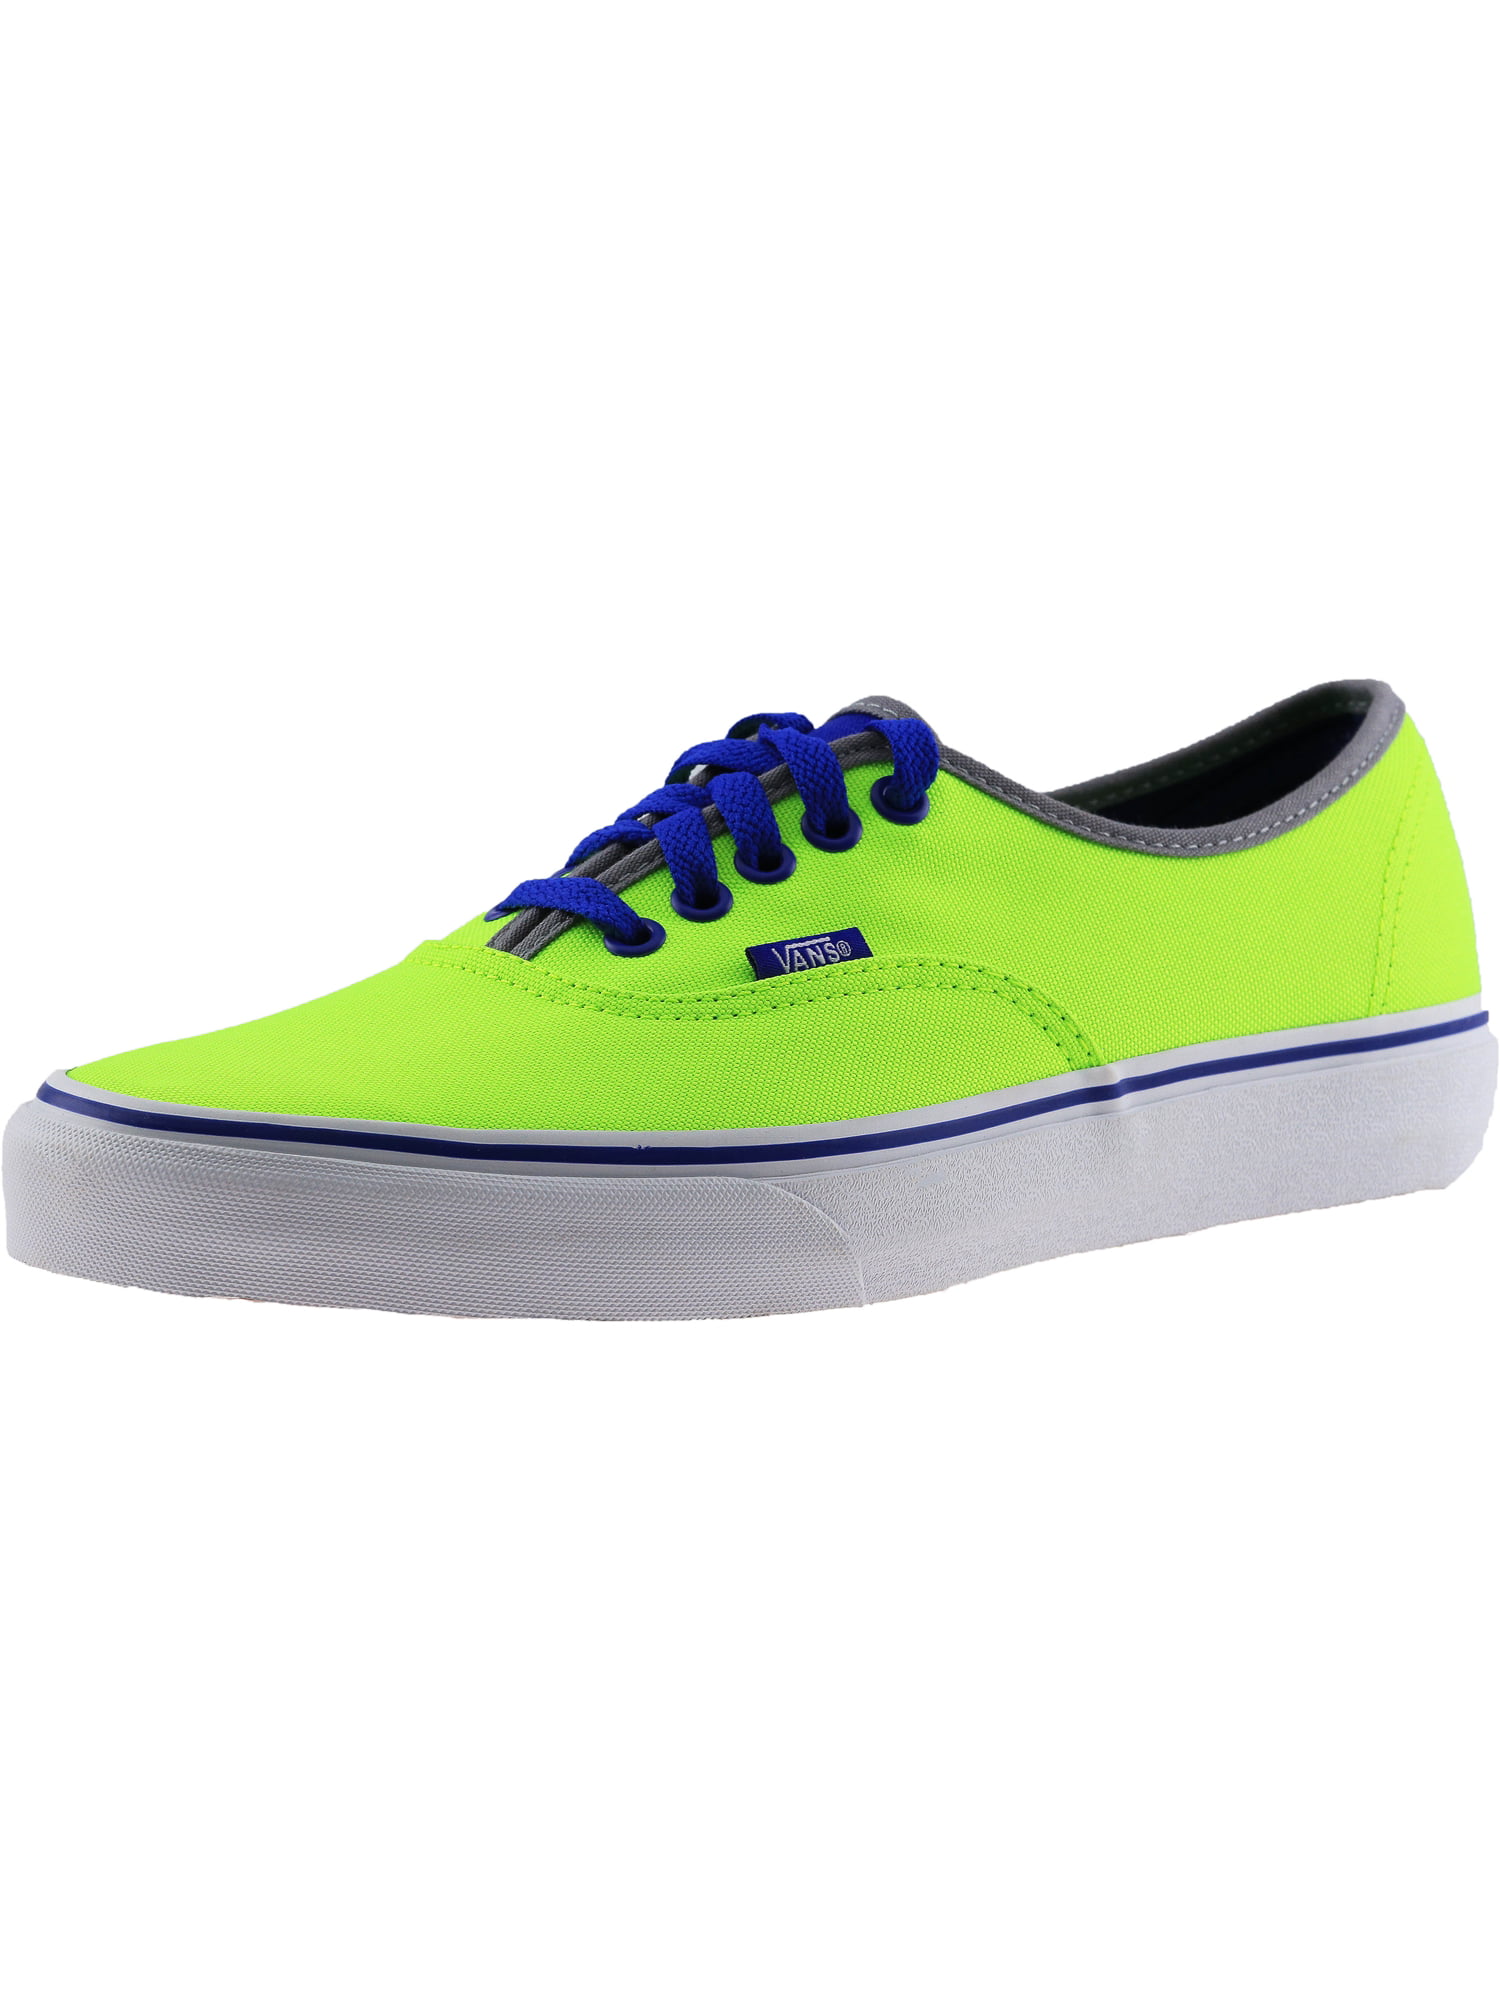 lime green vans authentic